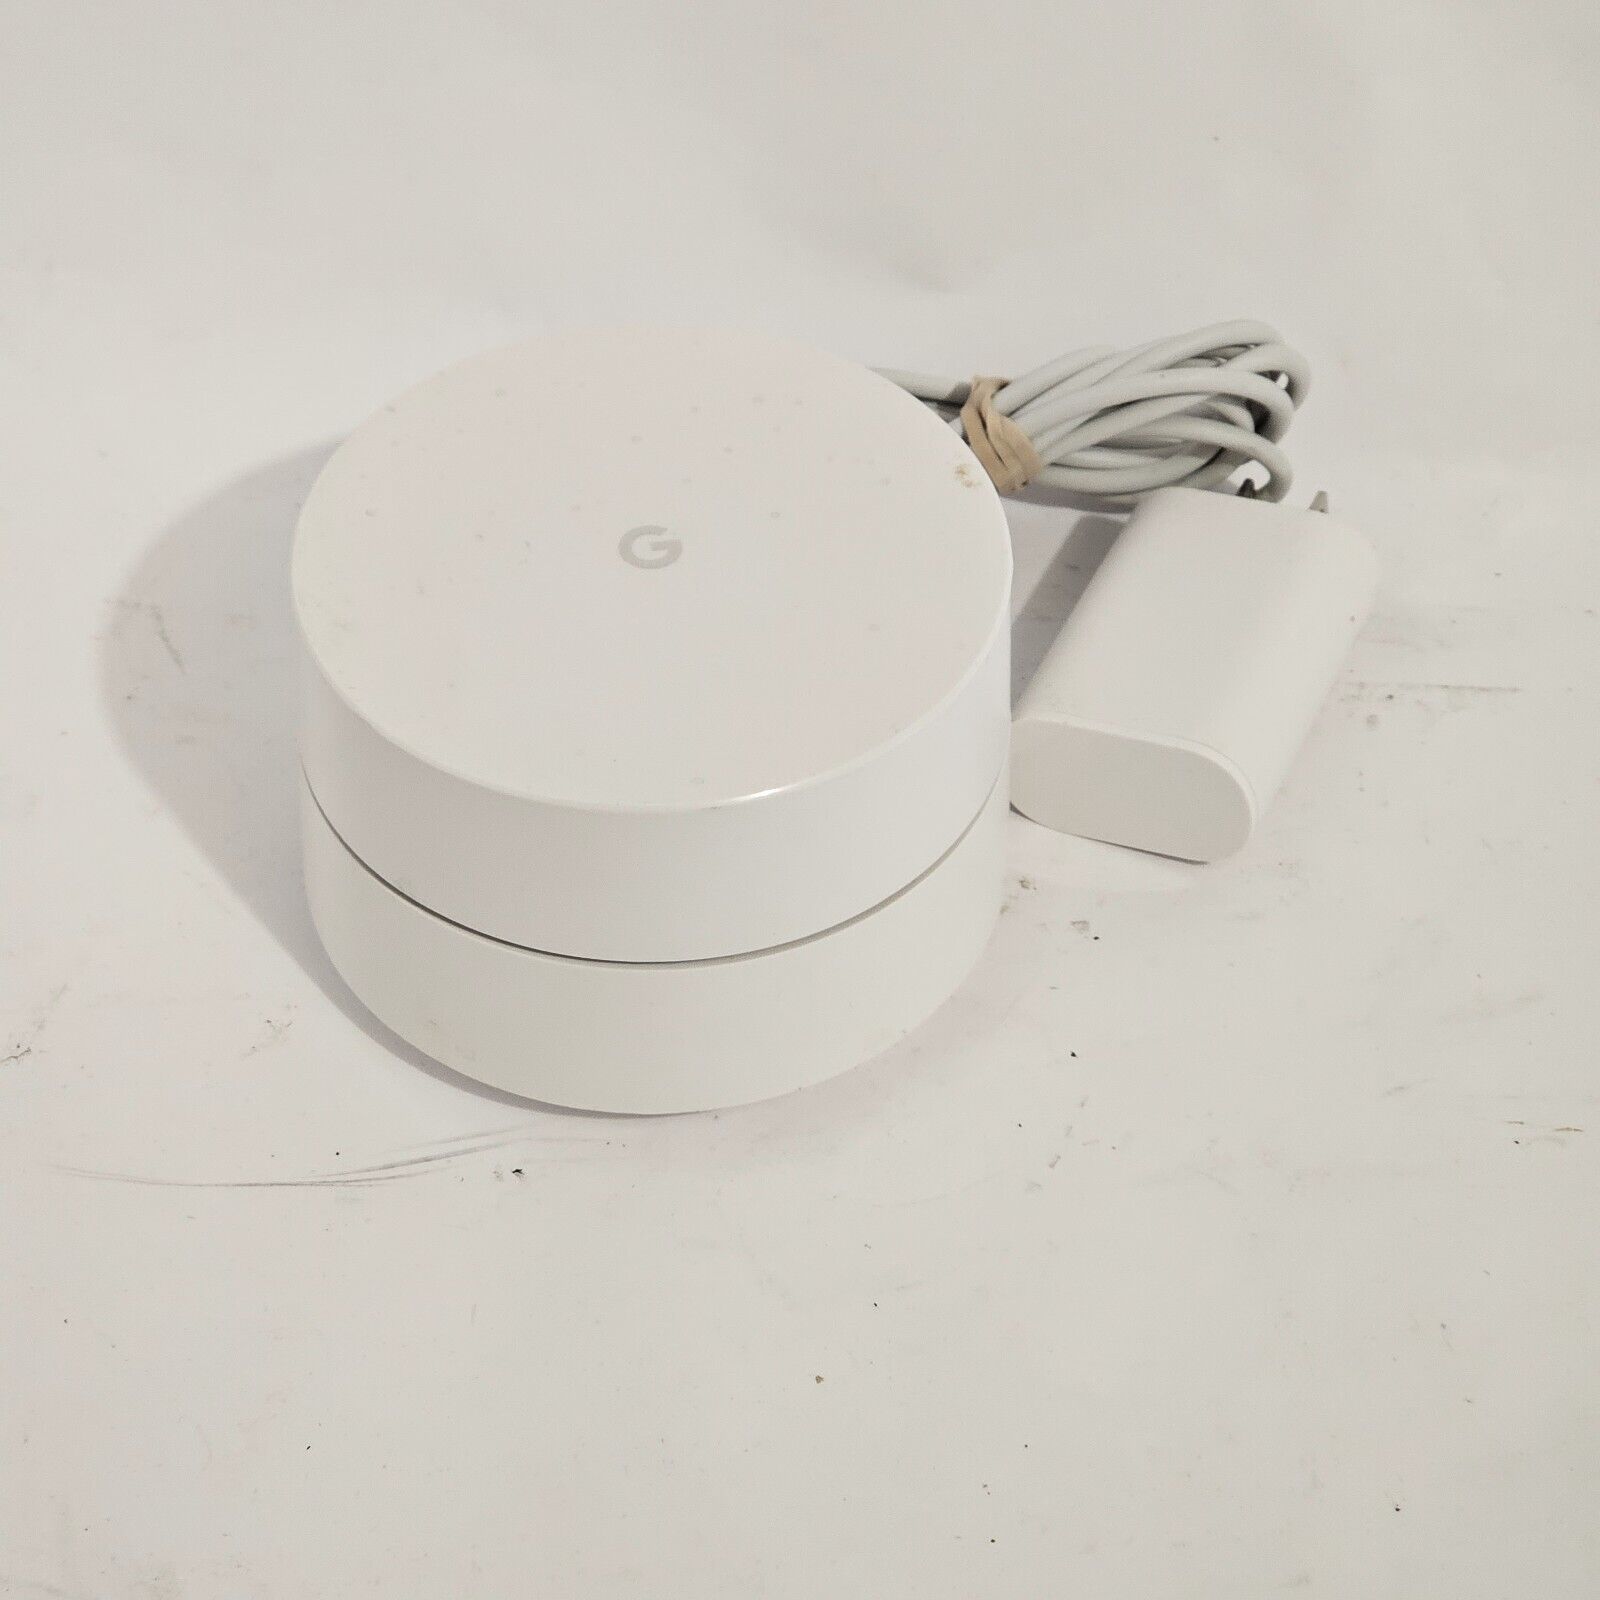 OEM White Google Wi-Fi Whole Home Wireless Router AC-1304